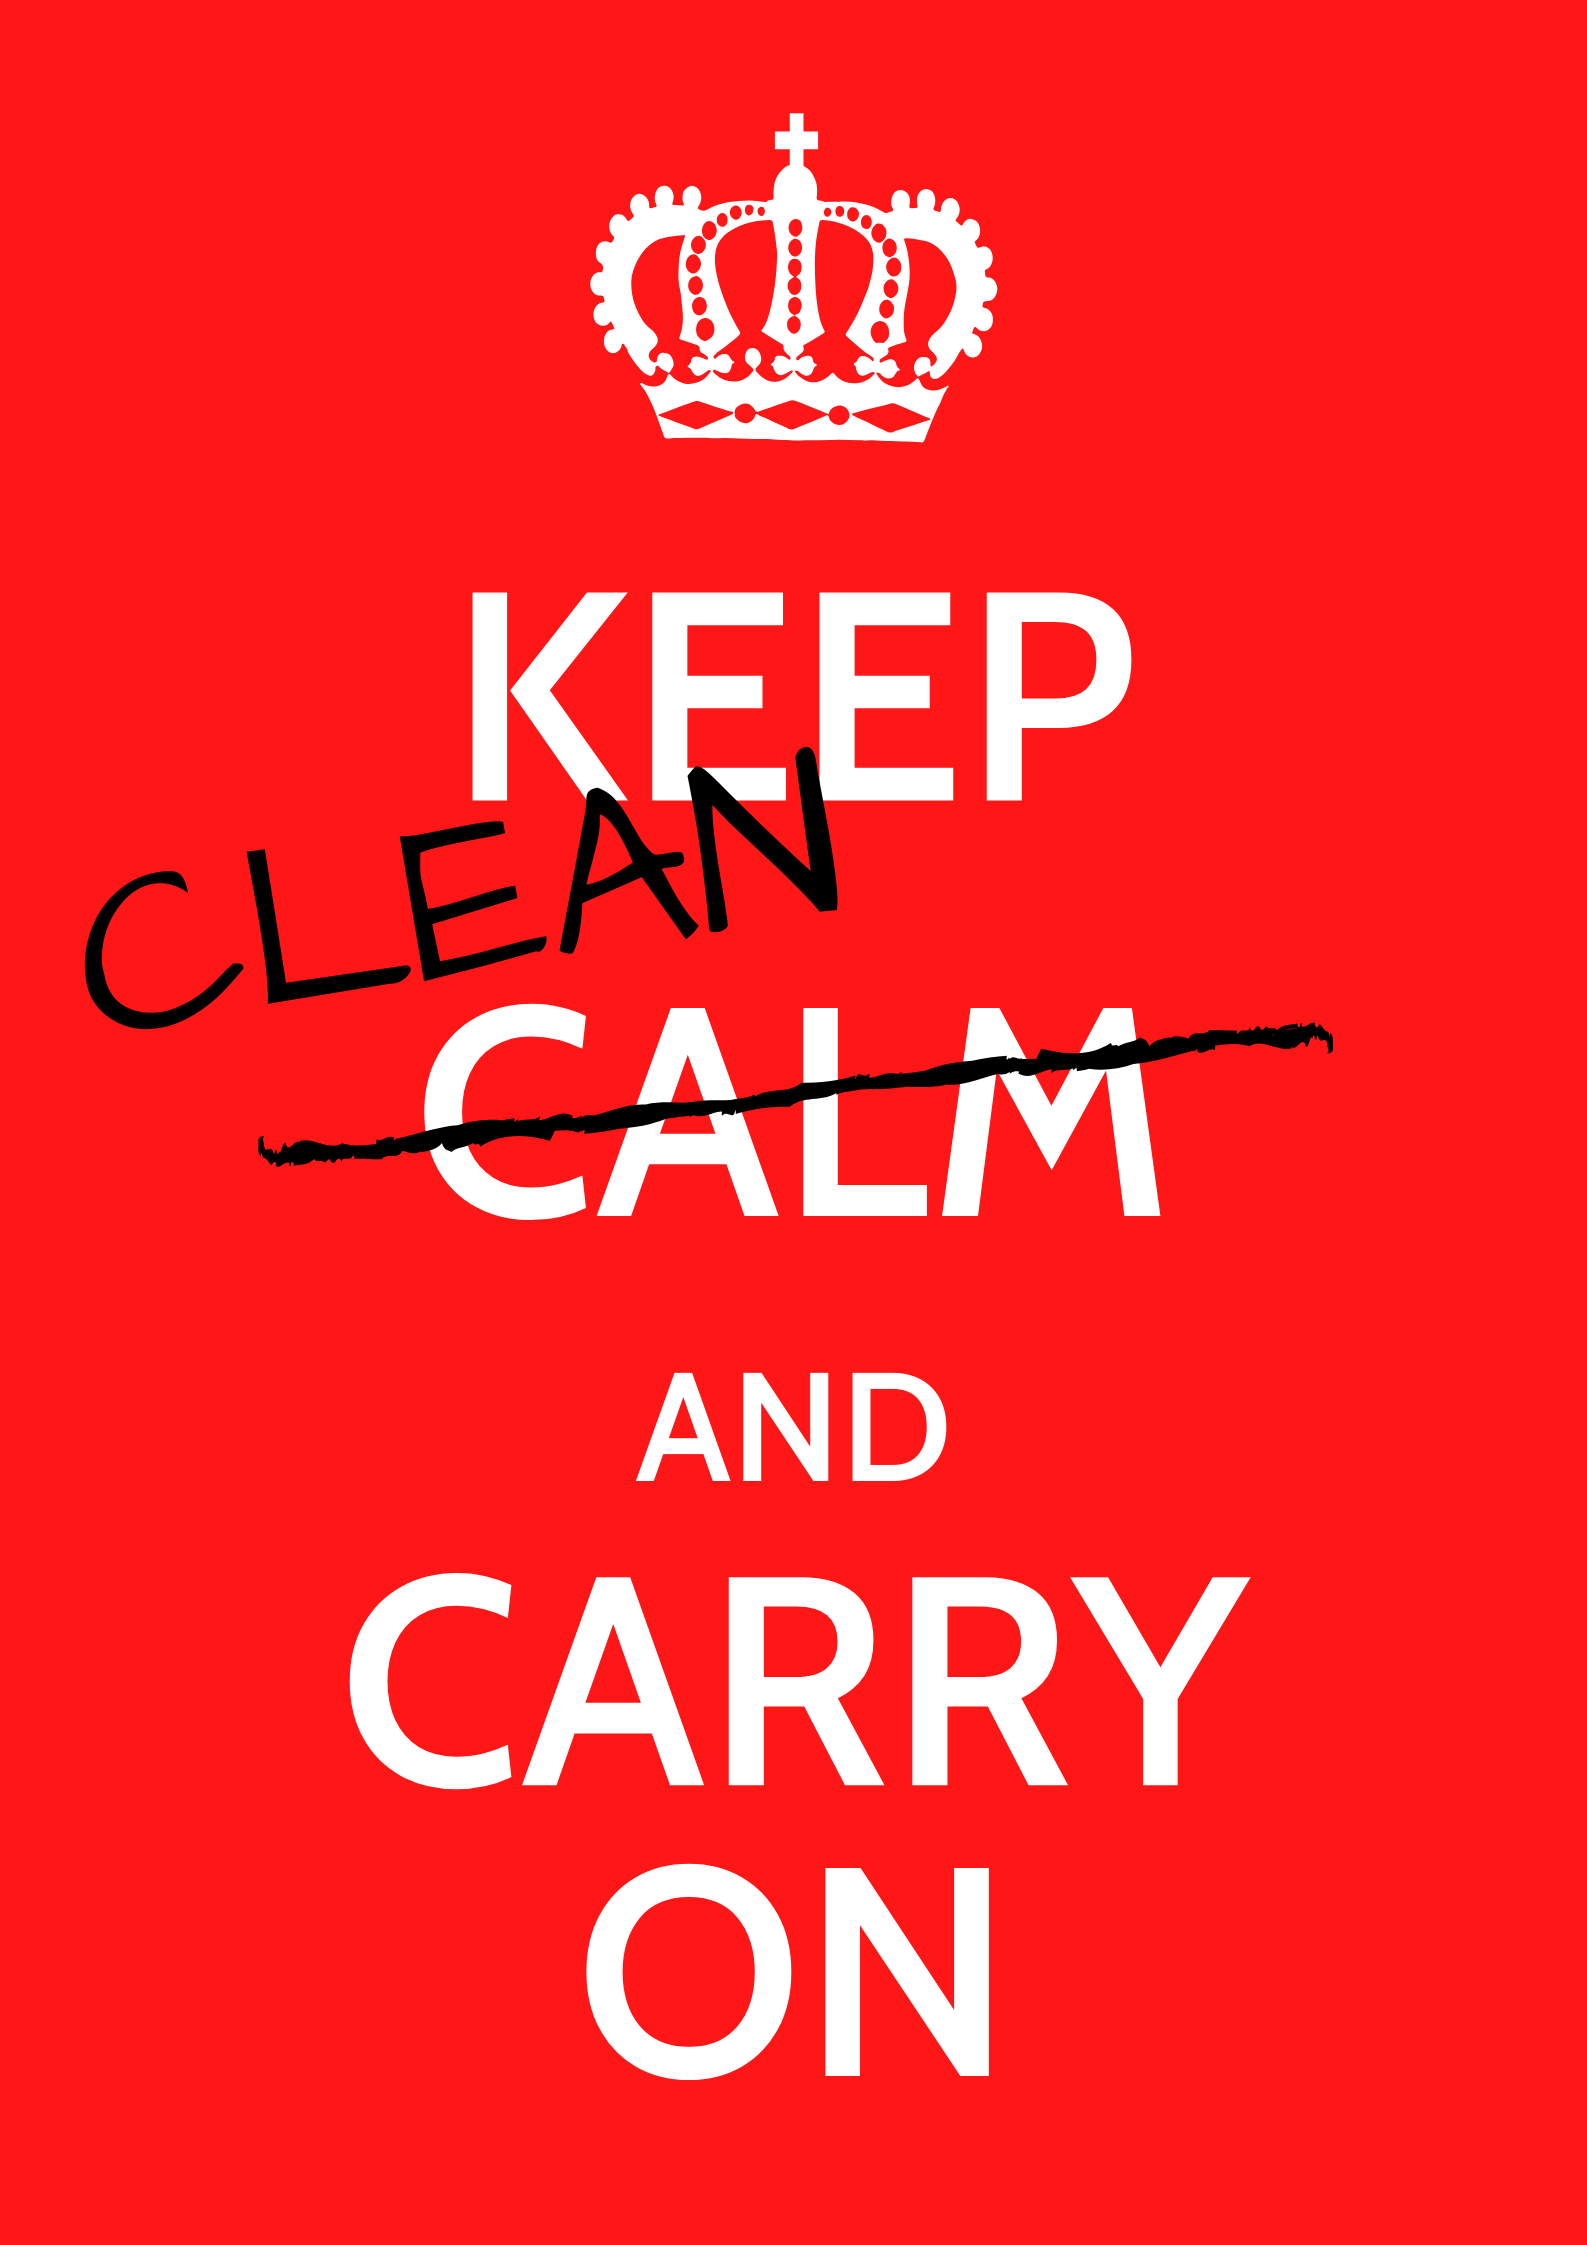 Keep Calm and Carry On Poster with Calm crossed our and replaced by a handwritten Clean. Red background white and black text